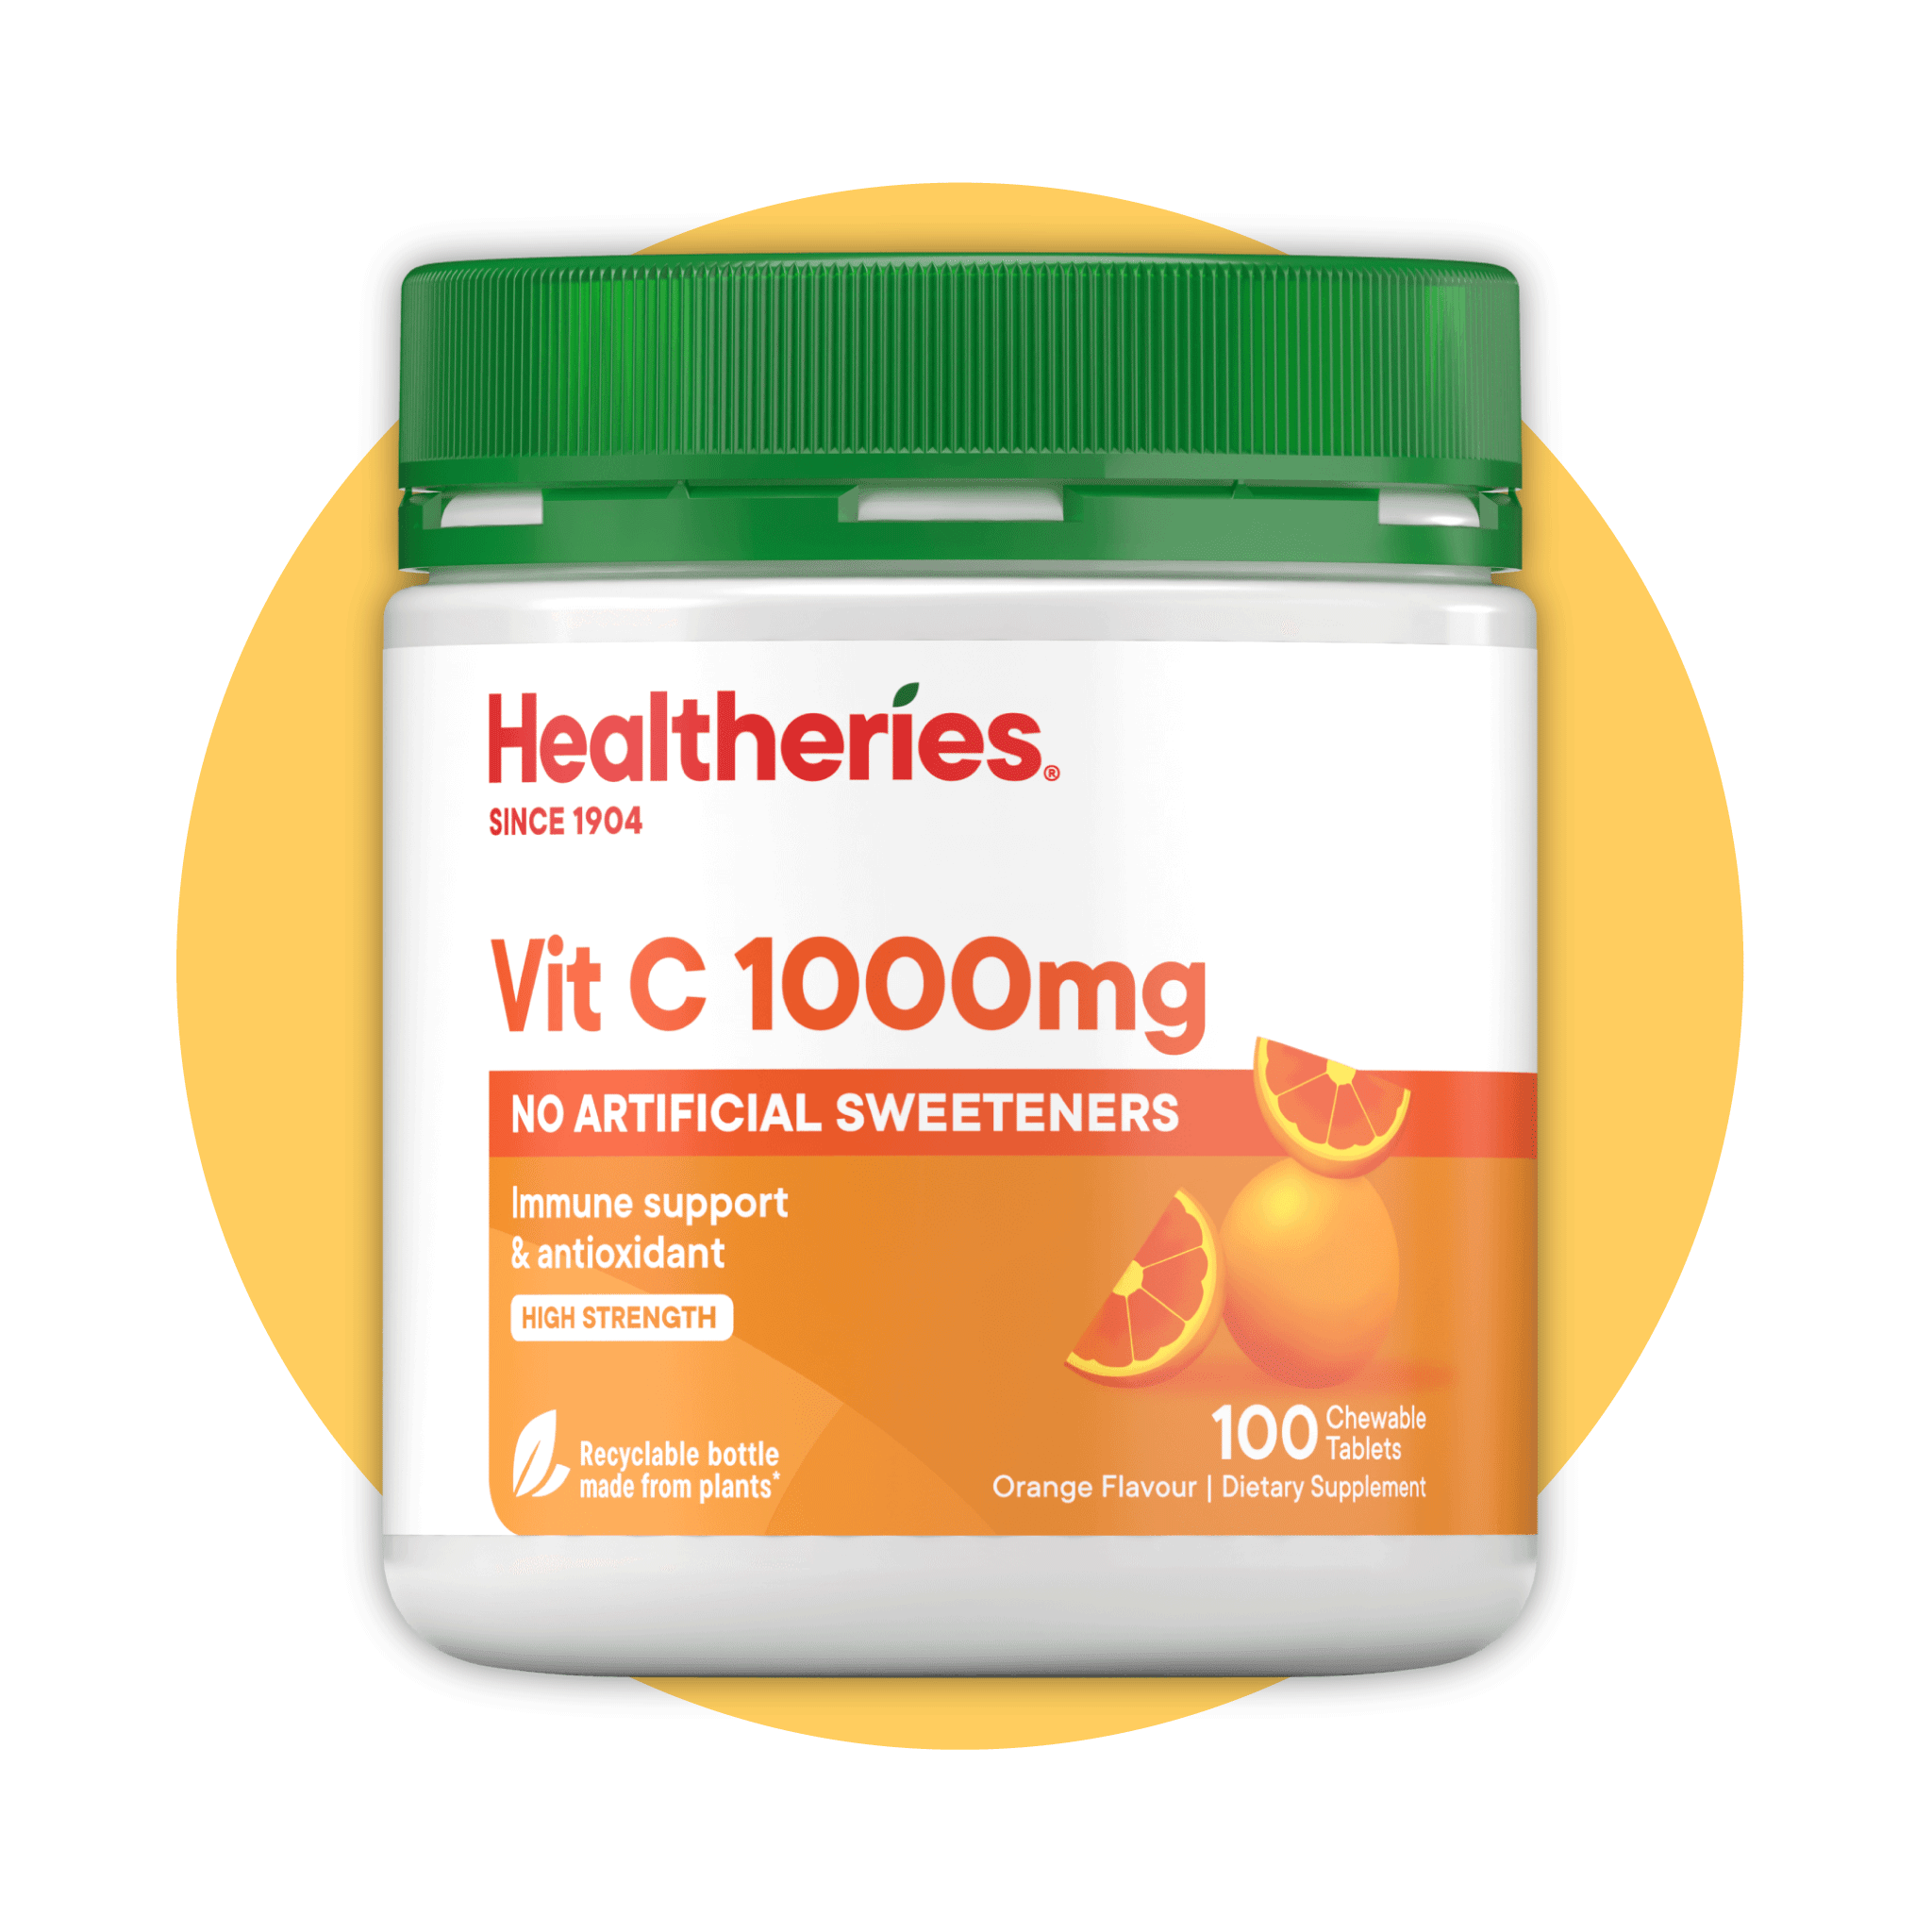 (HAStaff) Vit C 1000mg Chewable Tablets 100s (Expiry: 11/11/2024) - Healtheries Hong Kong